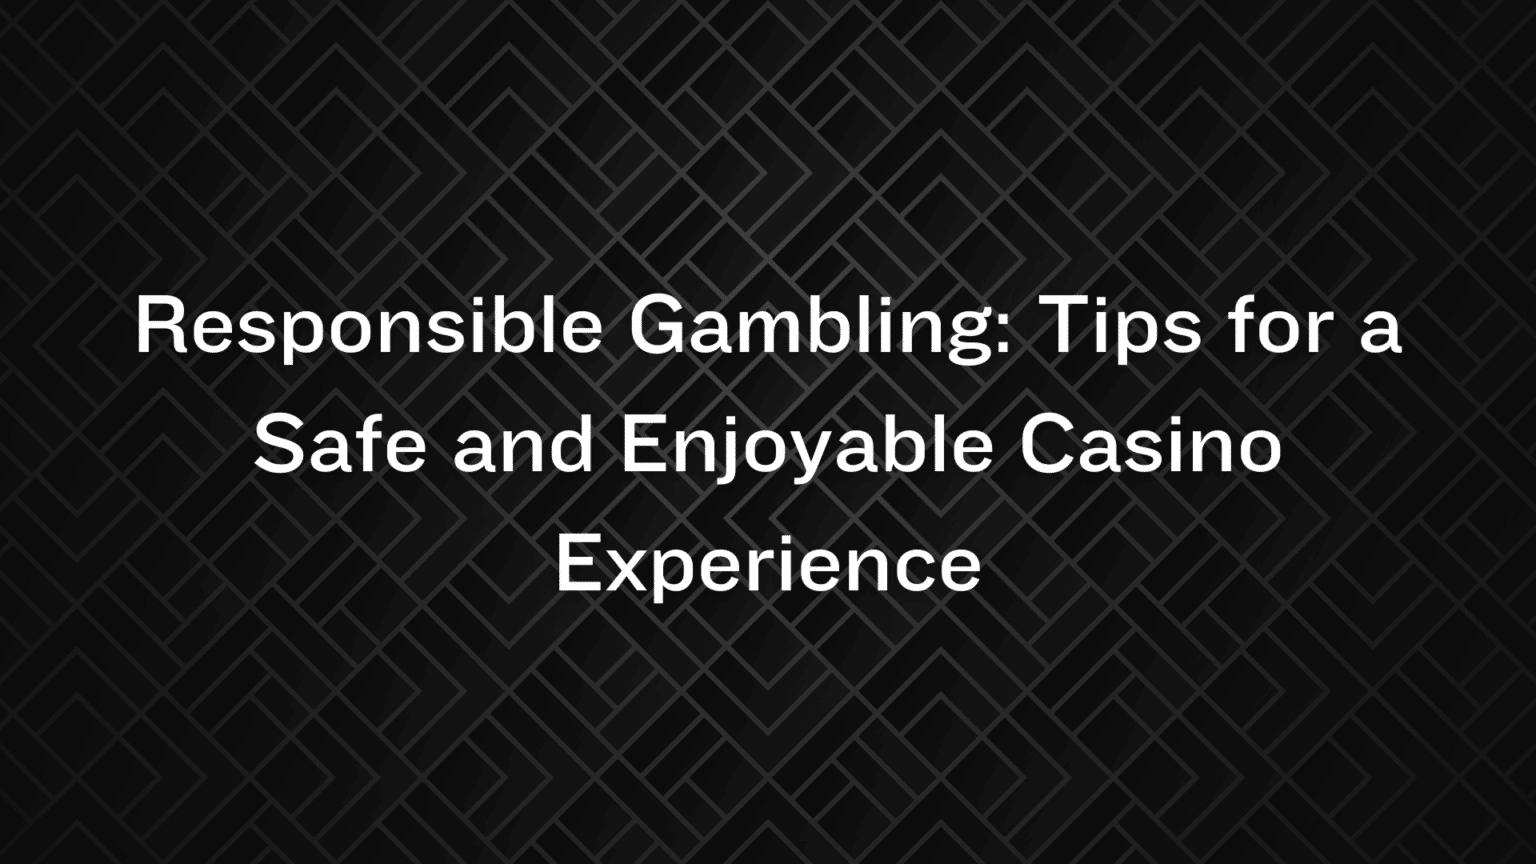 Responsible Gambling: Tips for a Safe and Enjoyable Casino Experience